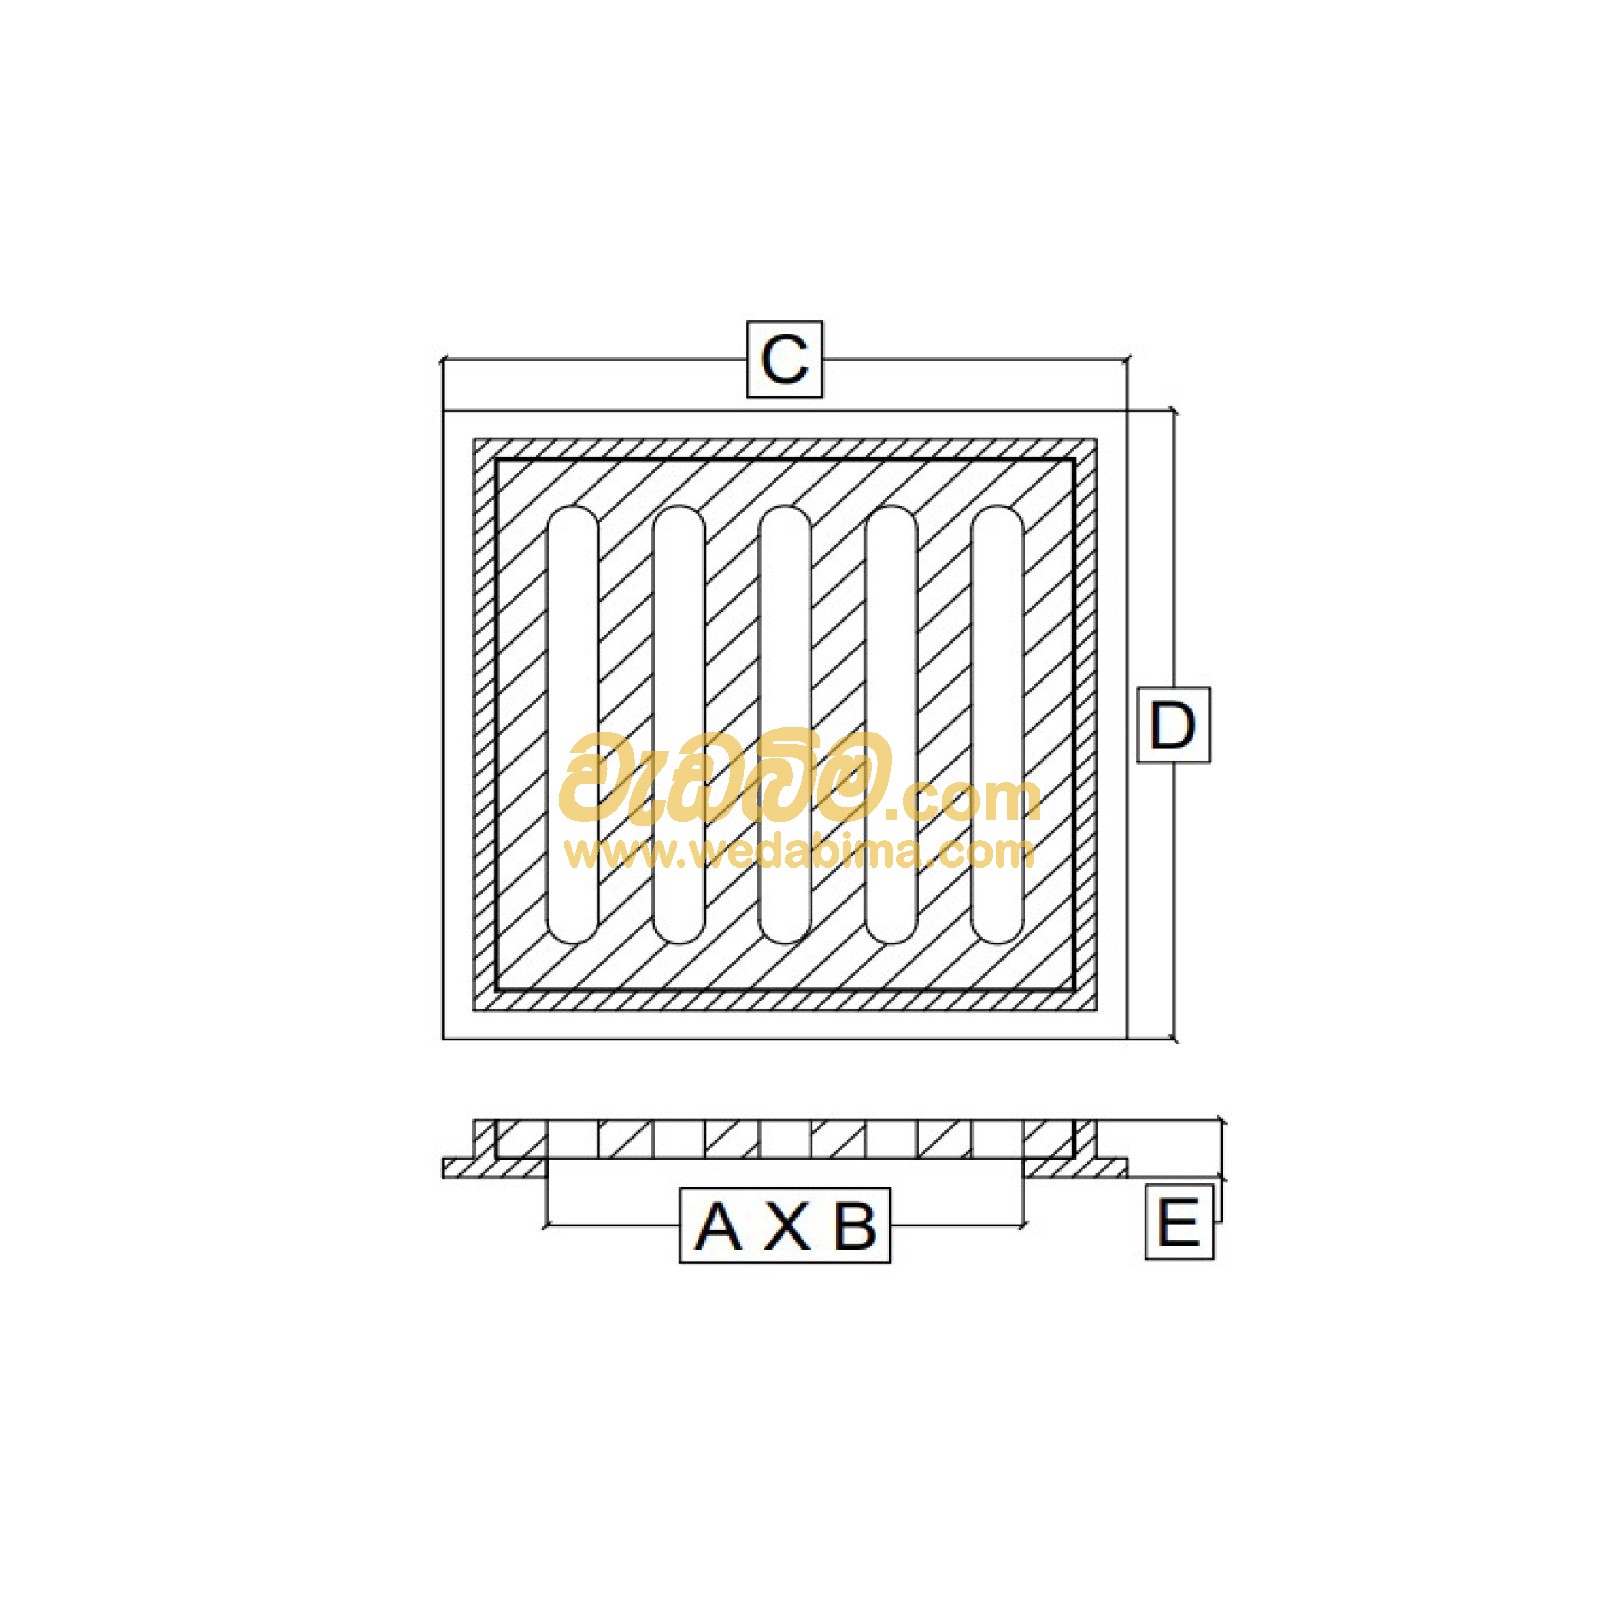 Cover image for 450mm x 450mm Cast-iron Grating cover